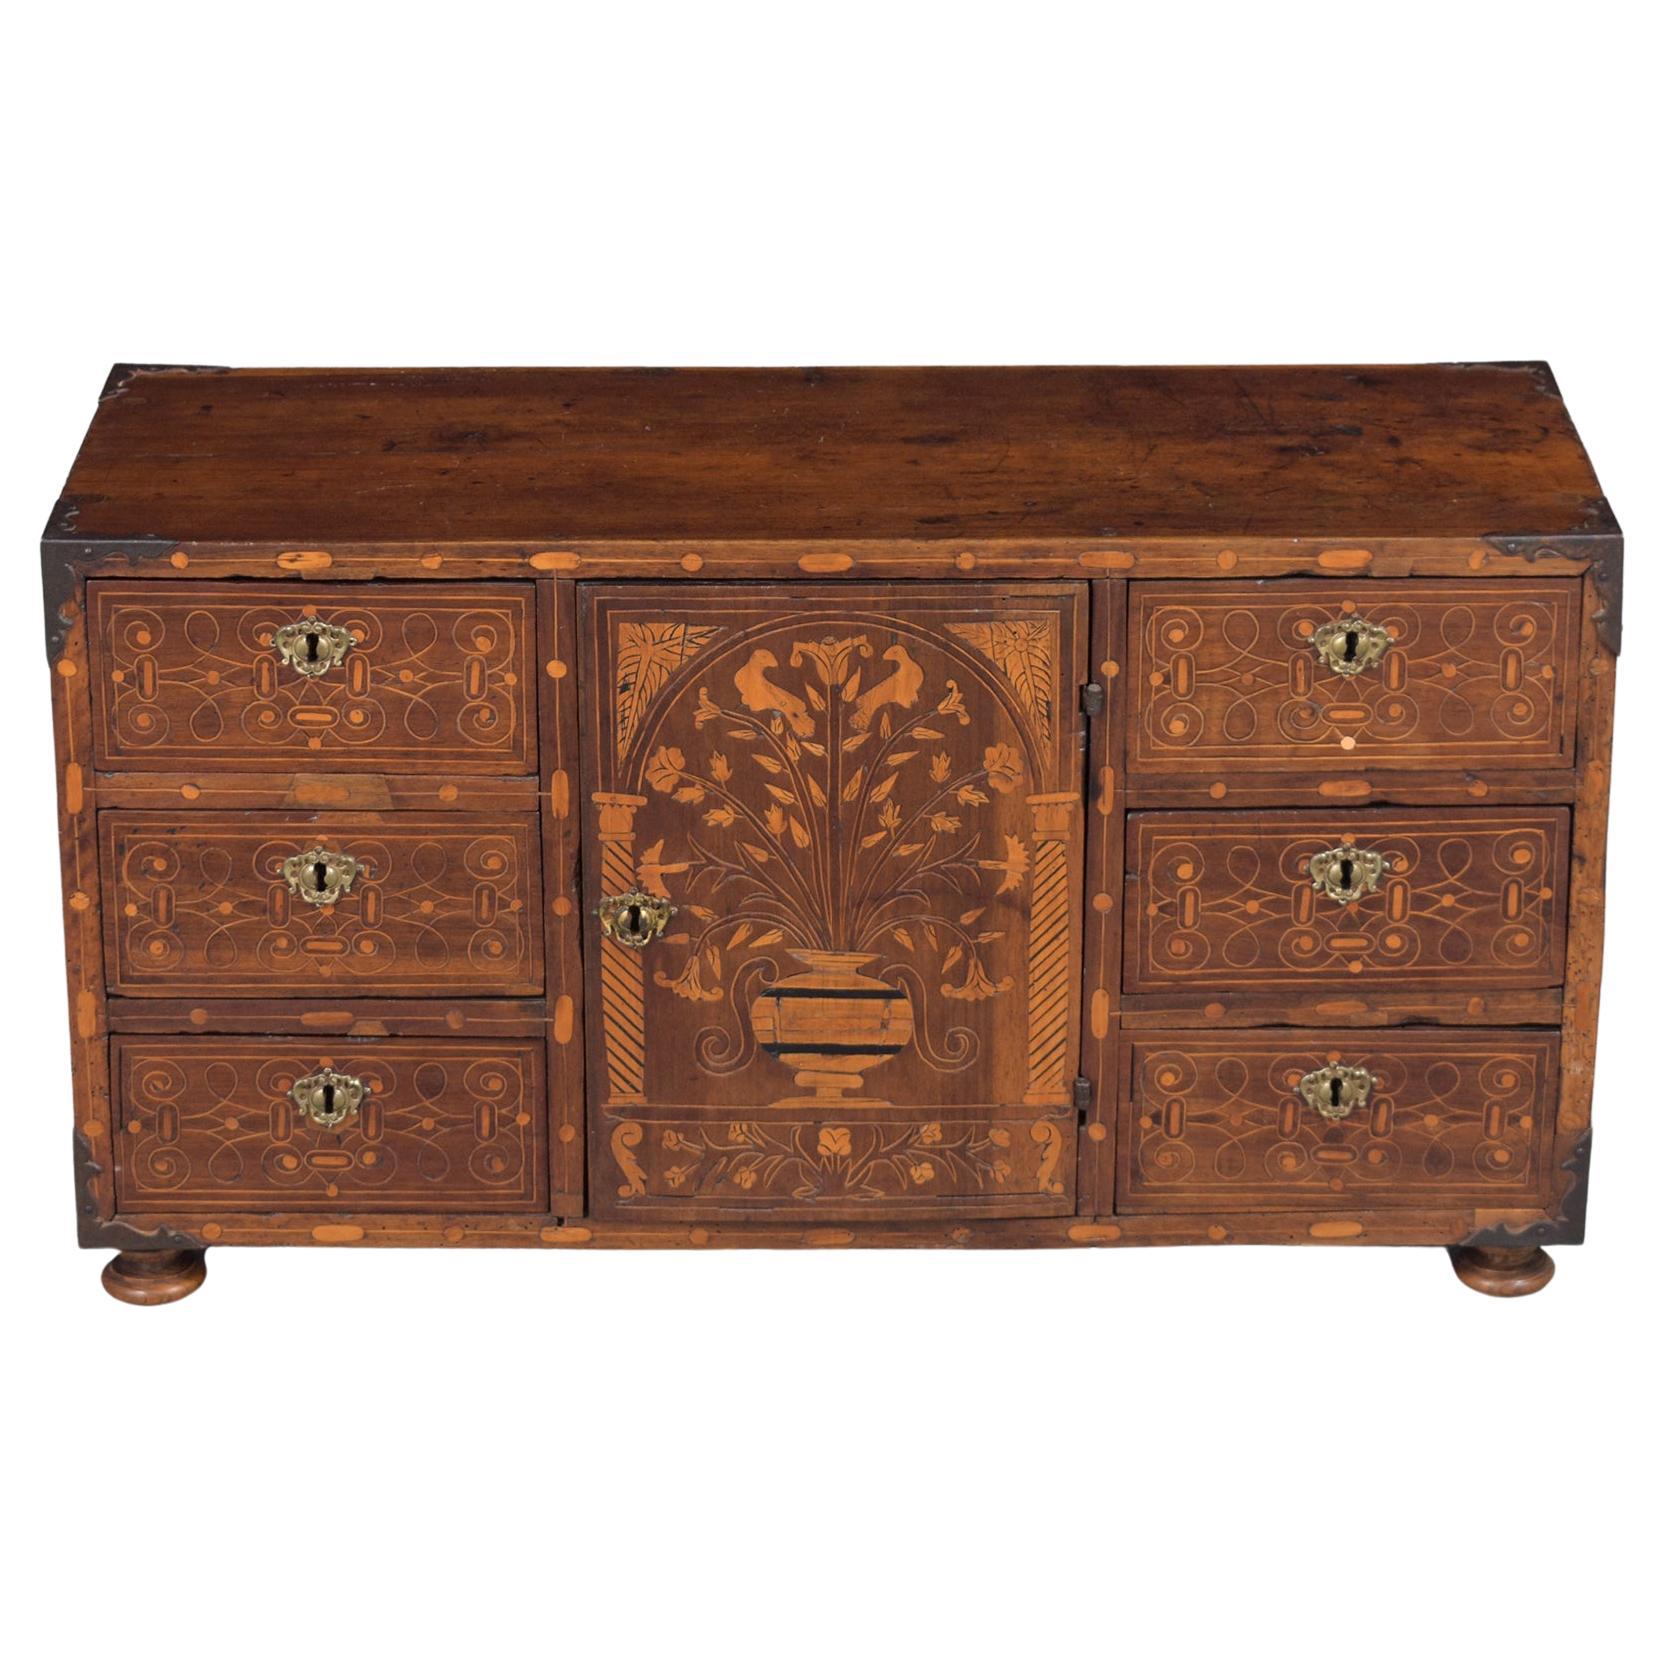 Exquisite 18th-Century Spanish Bargueño Cabinet: Walnut with Marquetry Inlays